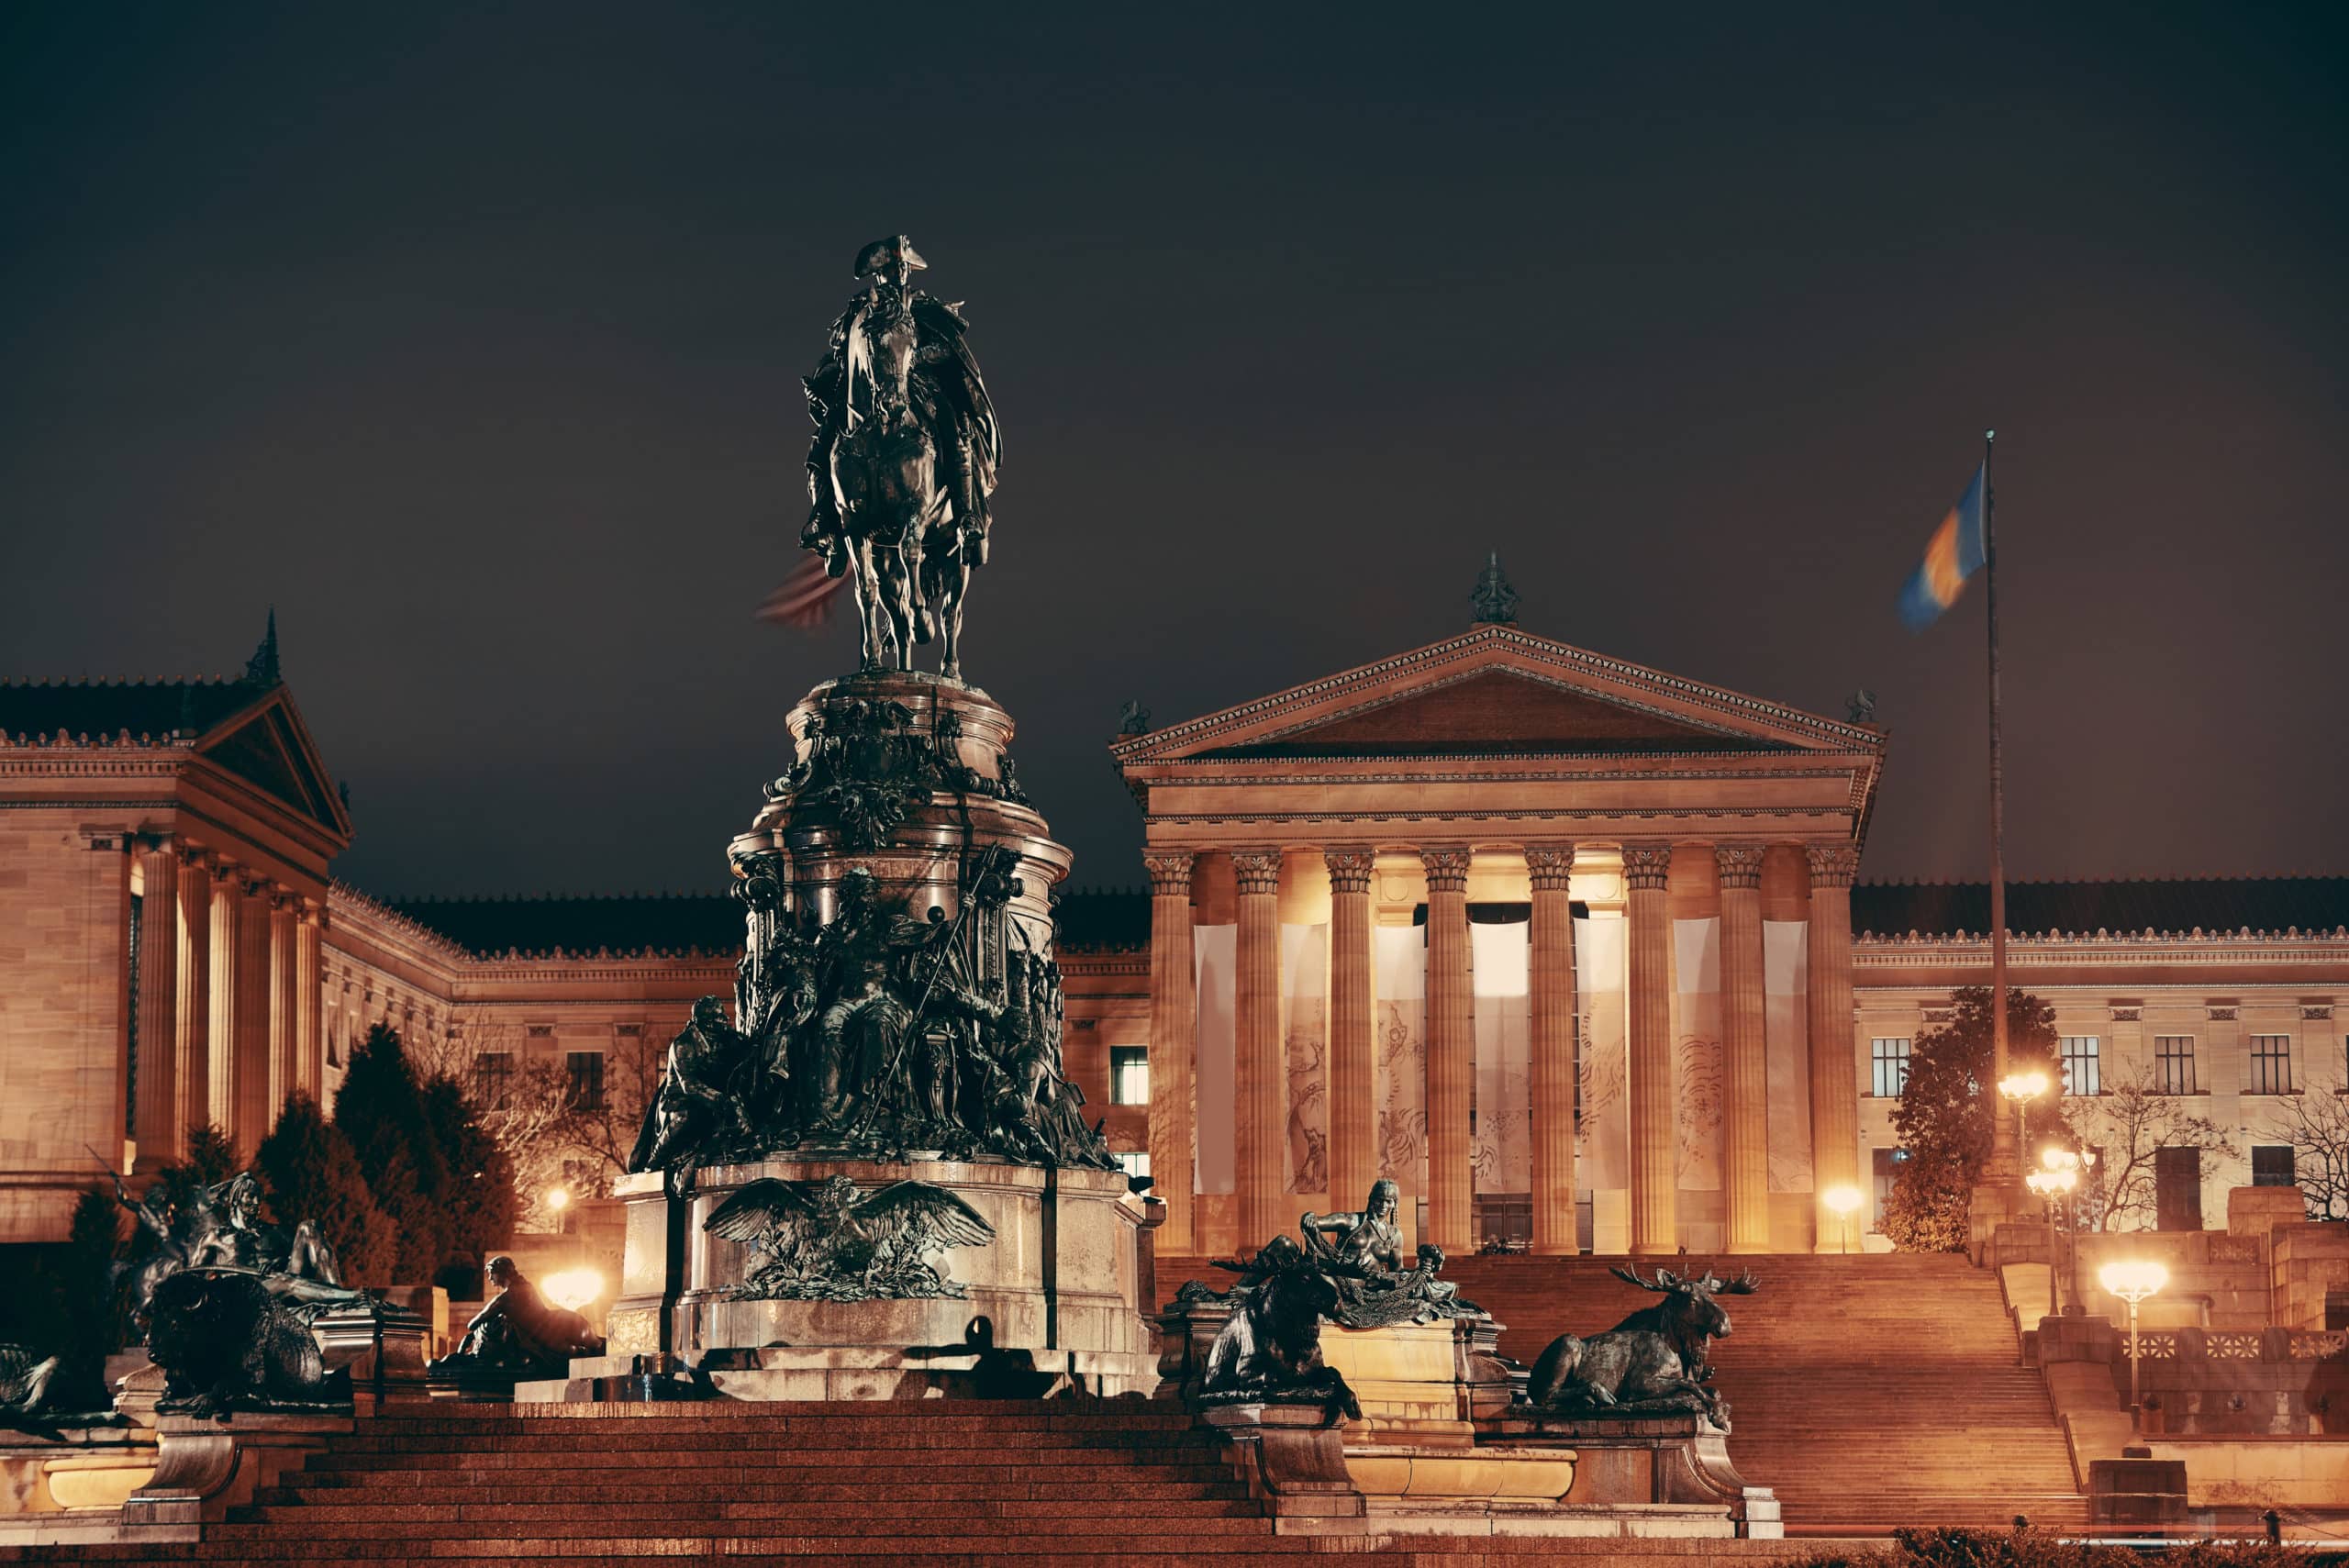 Philadelphia Art Museum at night as the famous city attractions.